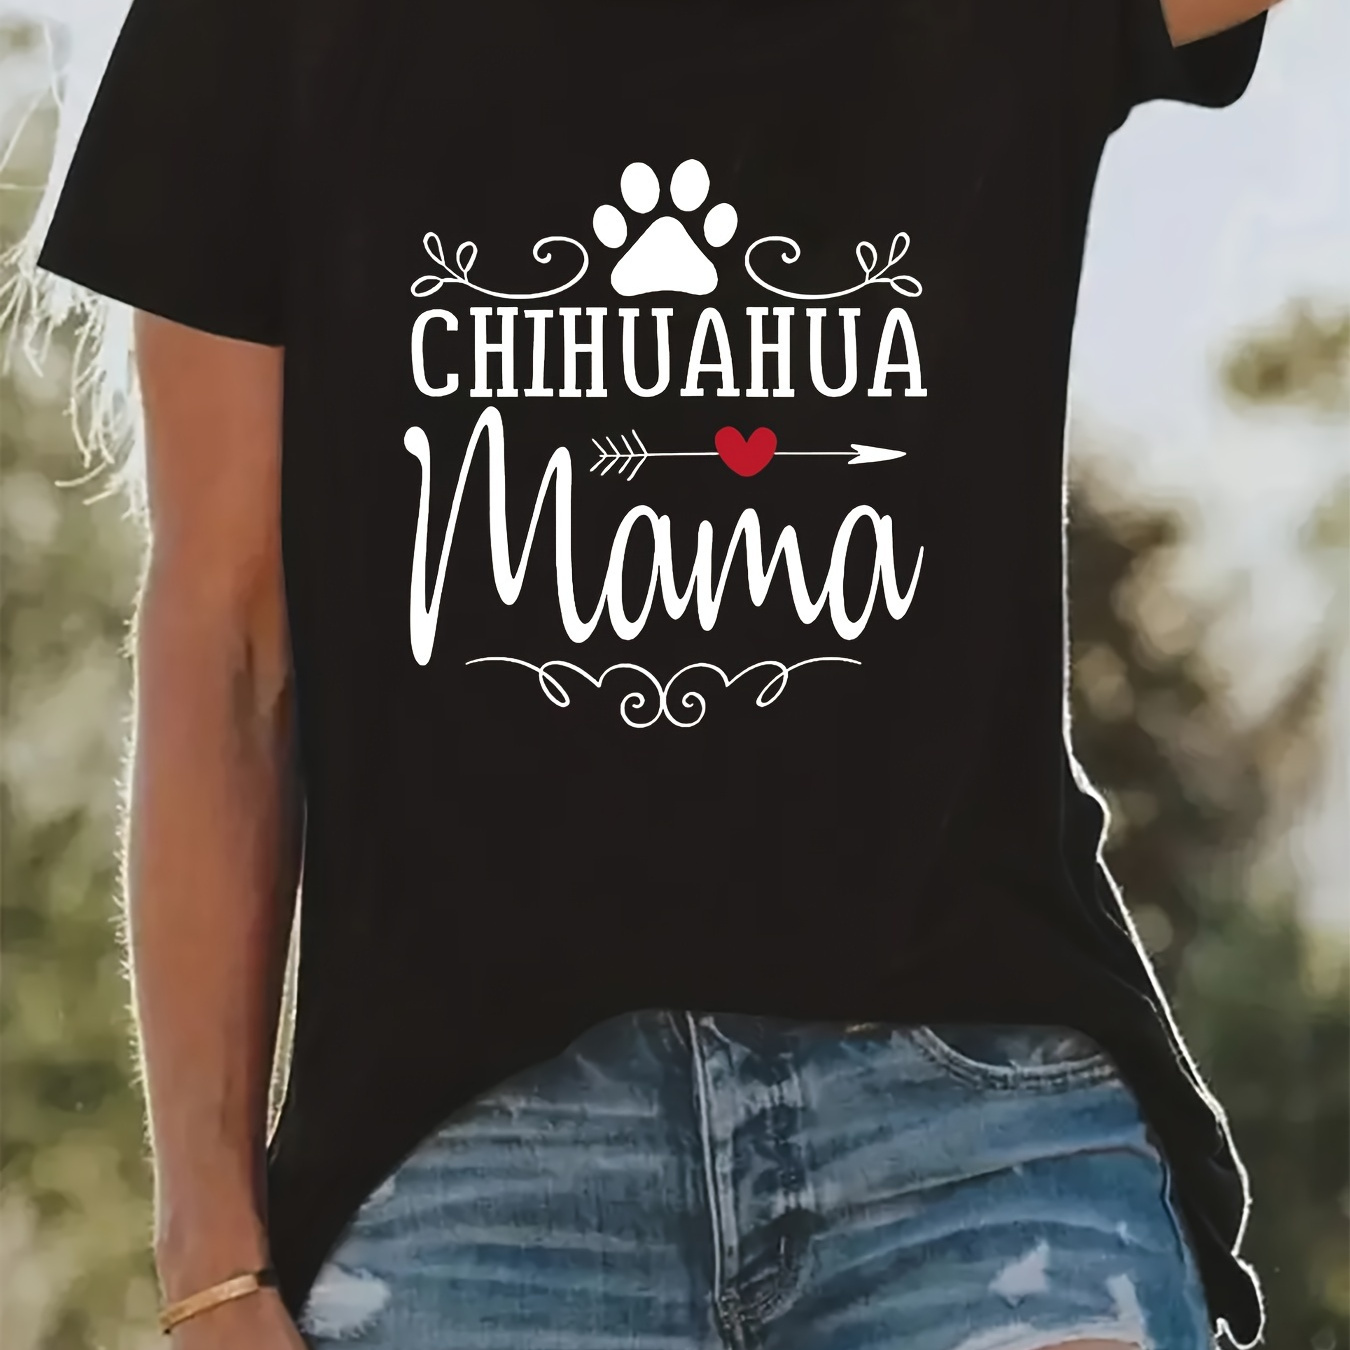 

Chihuahua Mama Print T-shirt, Casual Crew Neck Short Sleeve Top For Spring & Summer, Women's Clothing